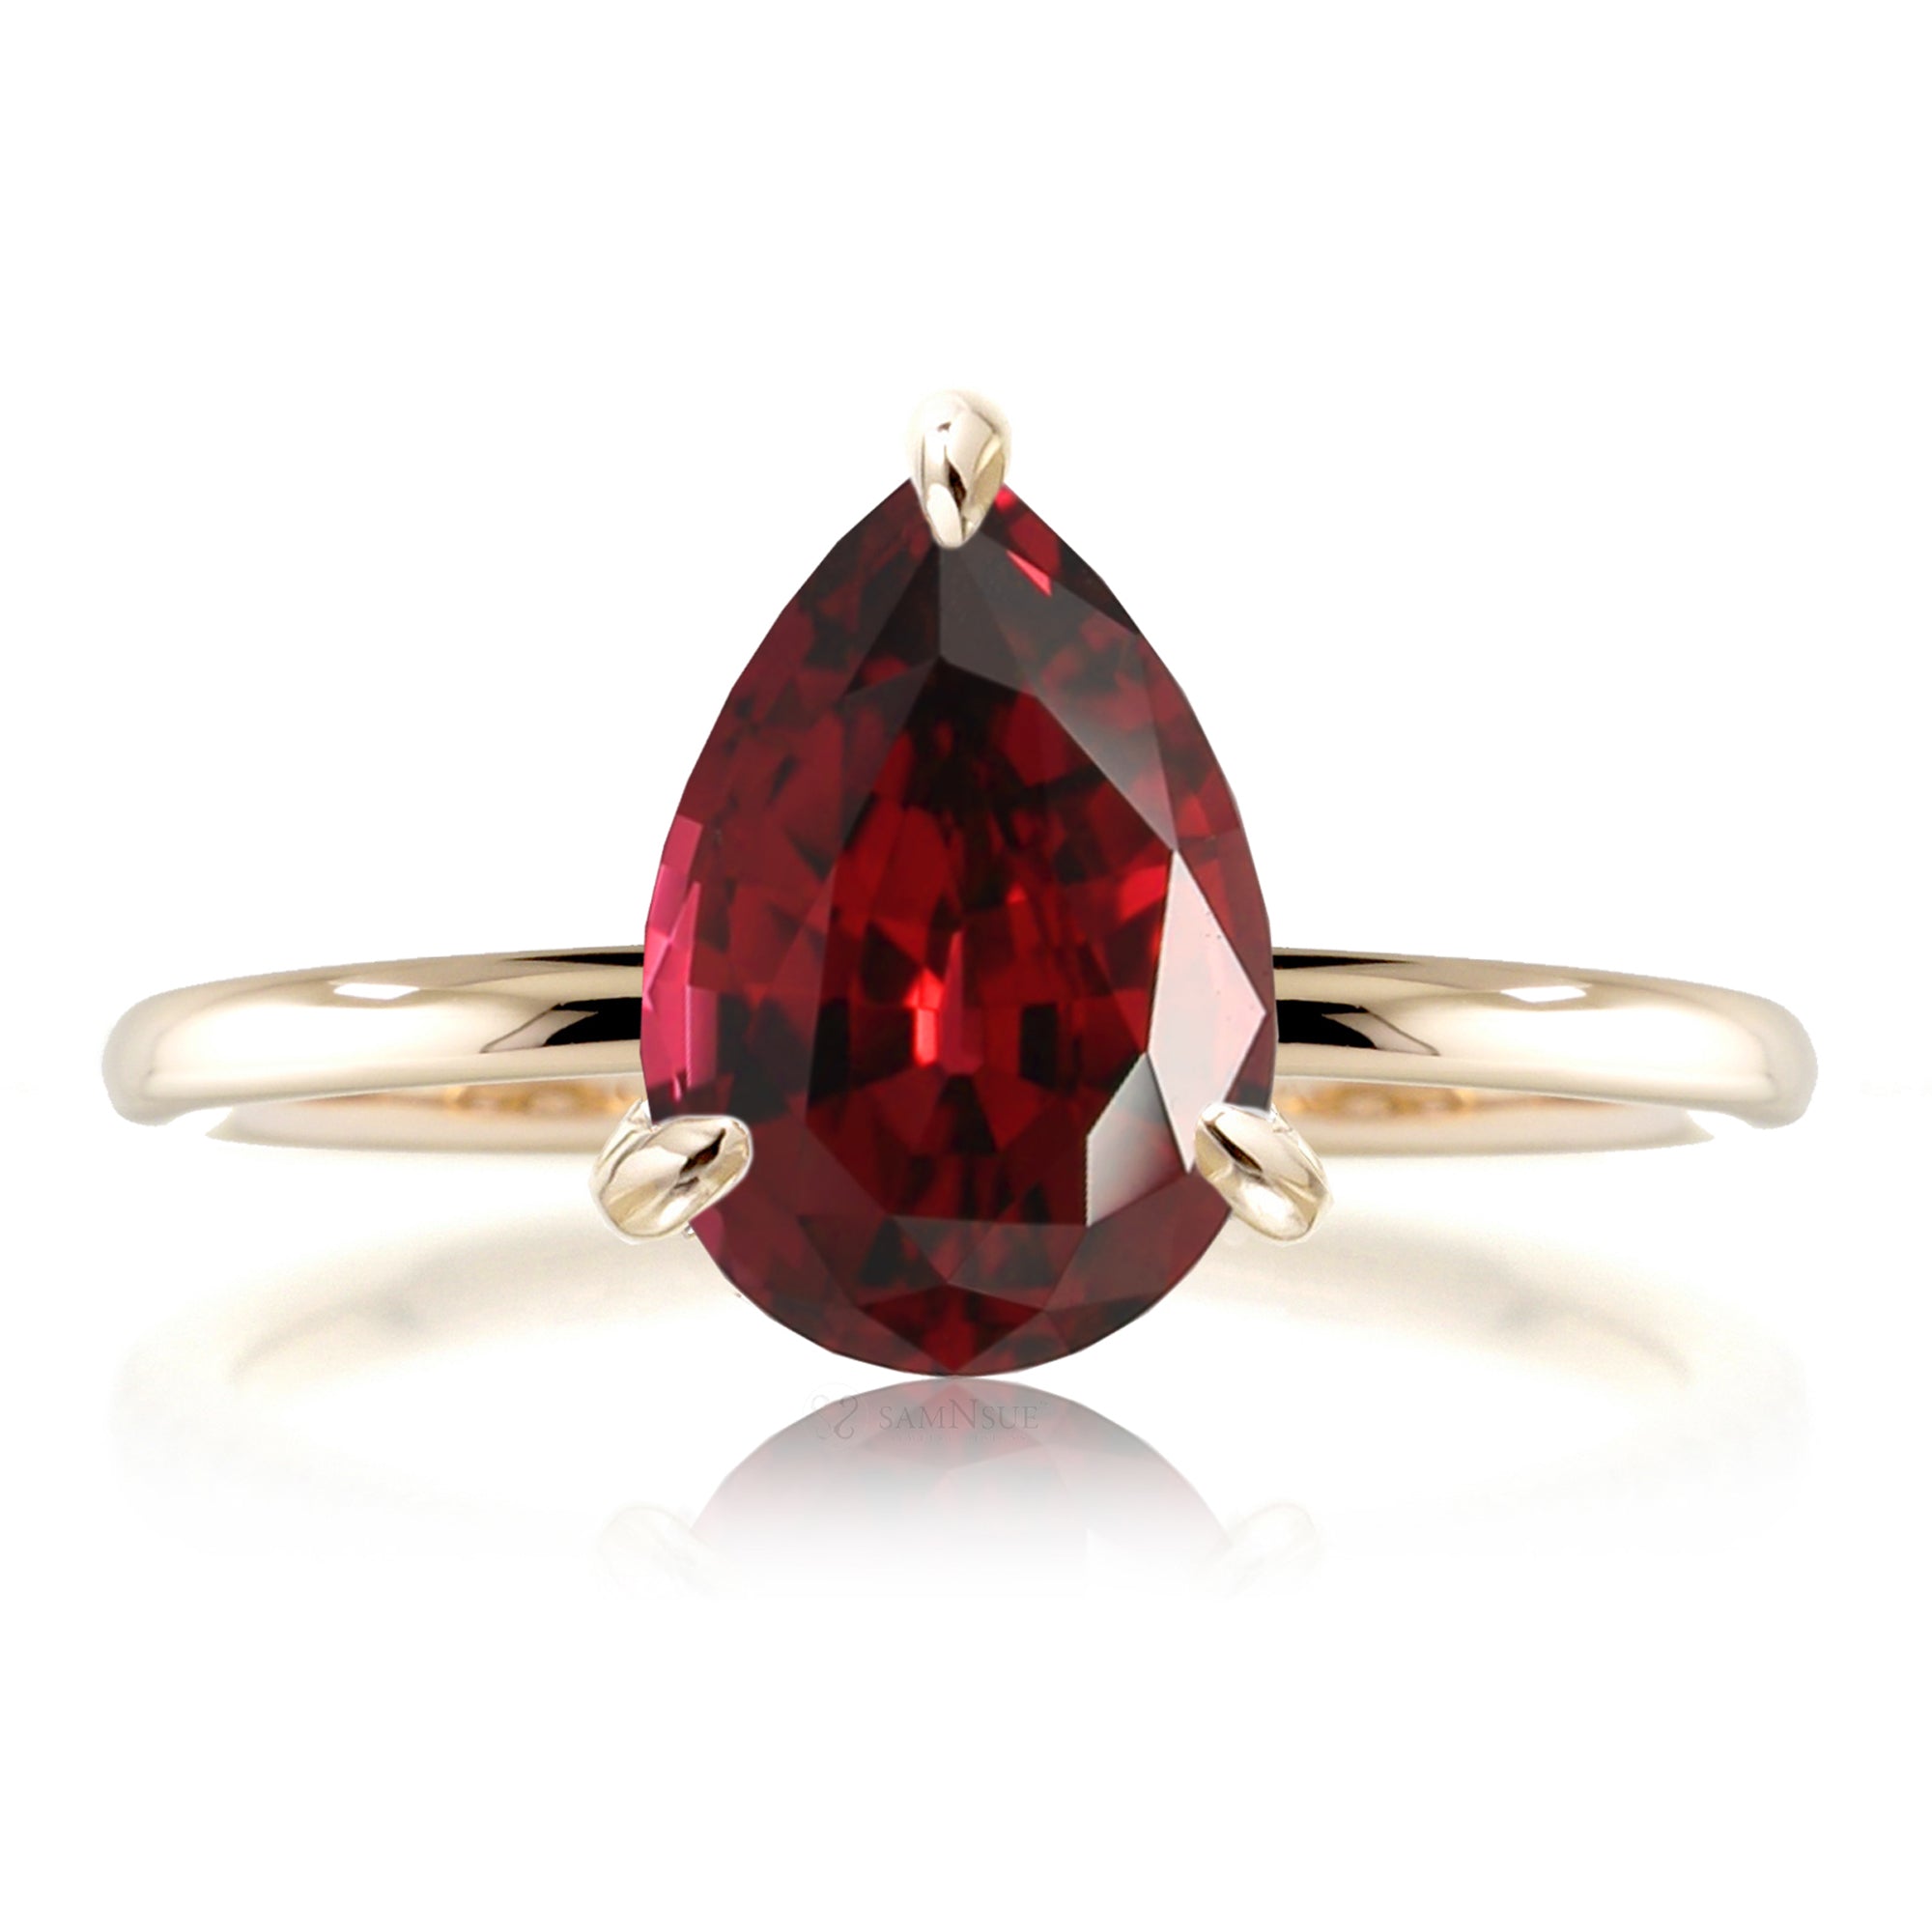 Pear cut lab-grown ruby engagement ring solid band yellow gold - the Ava